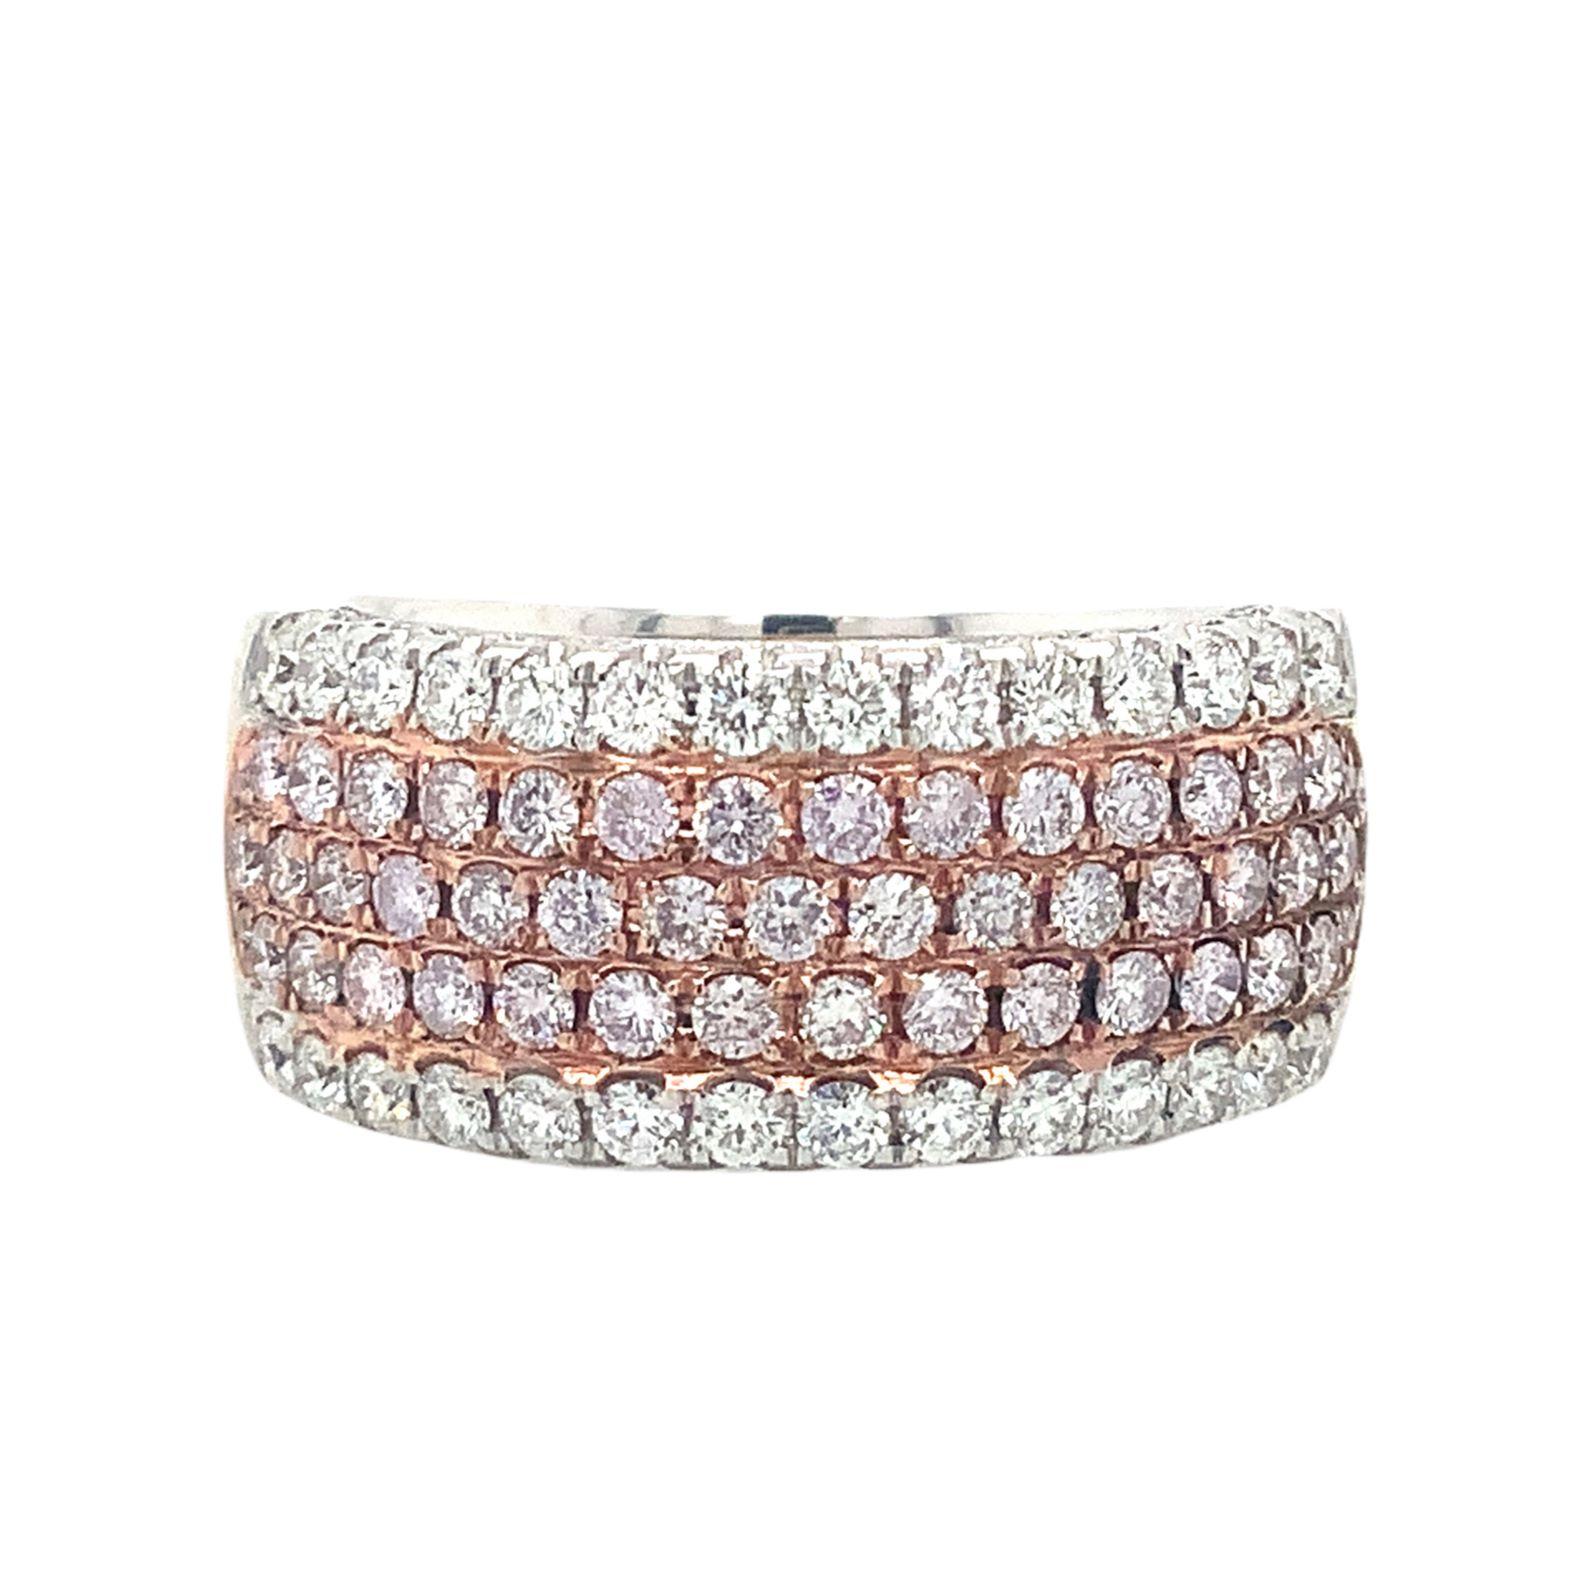 Roman + Jules Pavé Natural Fancy Pink and White Diamond Five Row Wide Band set in 18K White Gold, 3 Rows of Fancy Pink, and 2 Rows of White Diamonds,47 Round Brilliant Cut Pink Diamonds Equal 0.85 tw. Excellent Make and Polish. 54 Round Brilliant